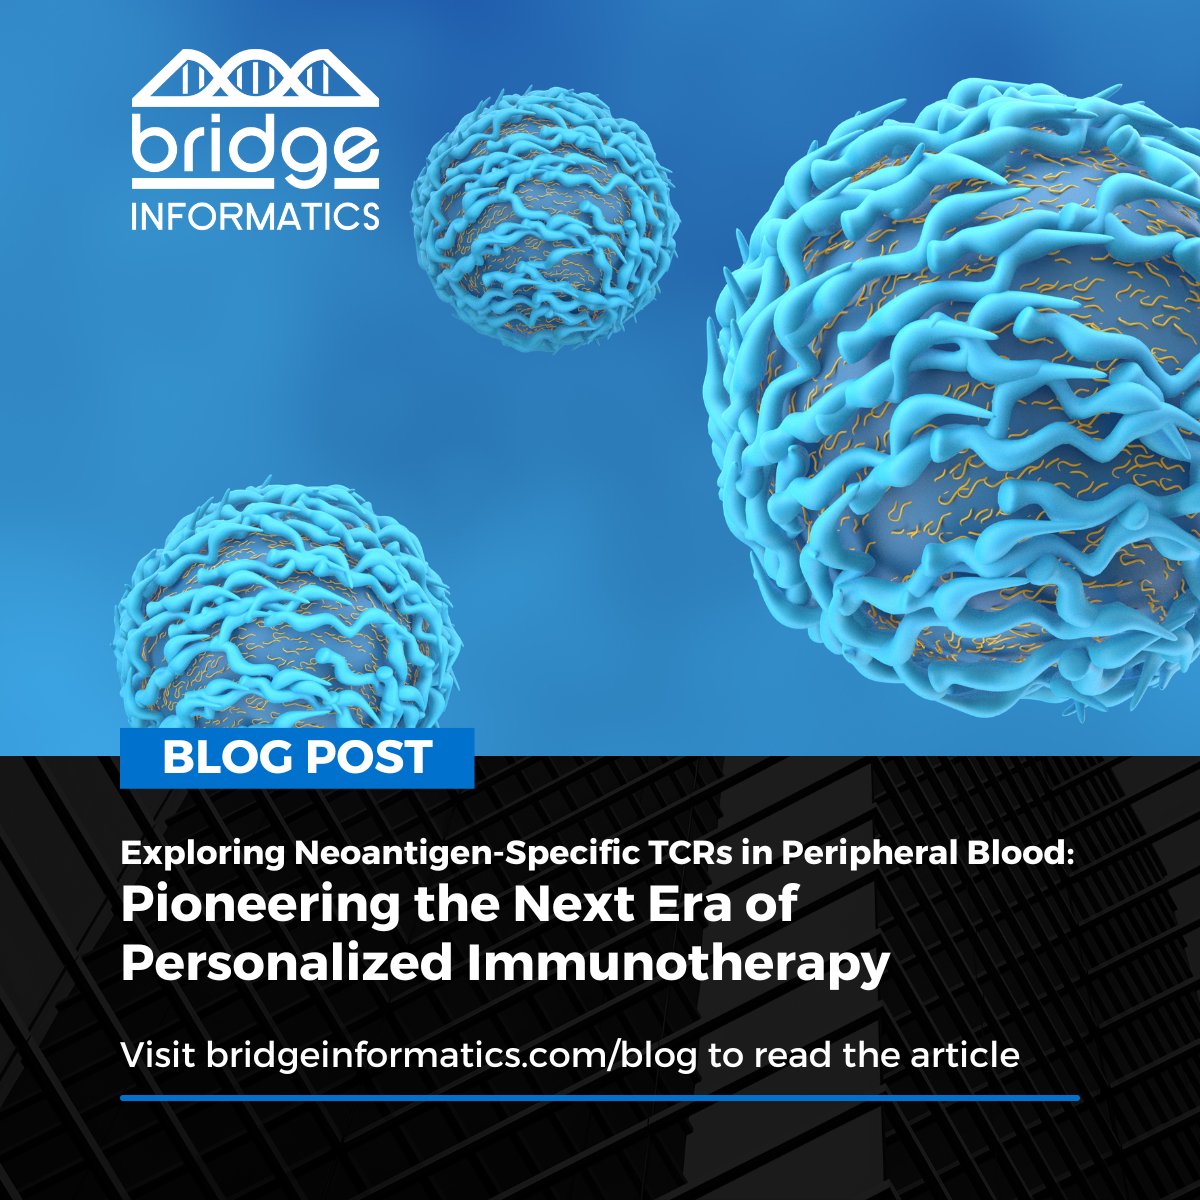 ICYMI: Explore the use of peripheral blood leukocytes (PBLs) in cancer patients as an alternative source of neoantigen specific anti-tumor T-cells and T-cell receptors (TCRs) for immune monitoring and personalized immunotherapies. bridgeinformatics.com/exploring-neoa…